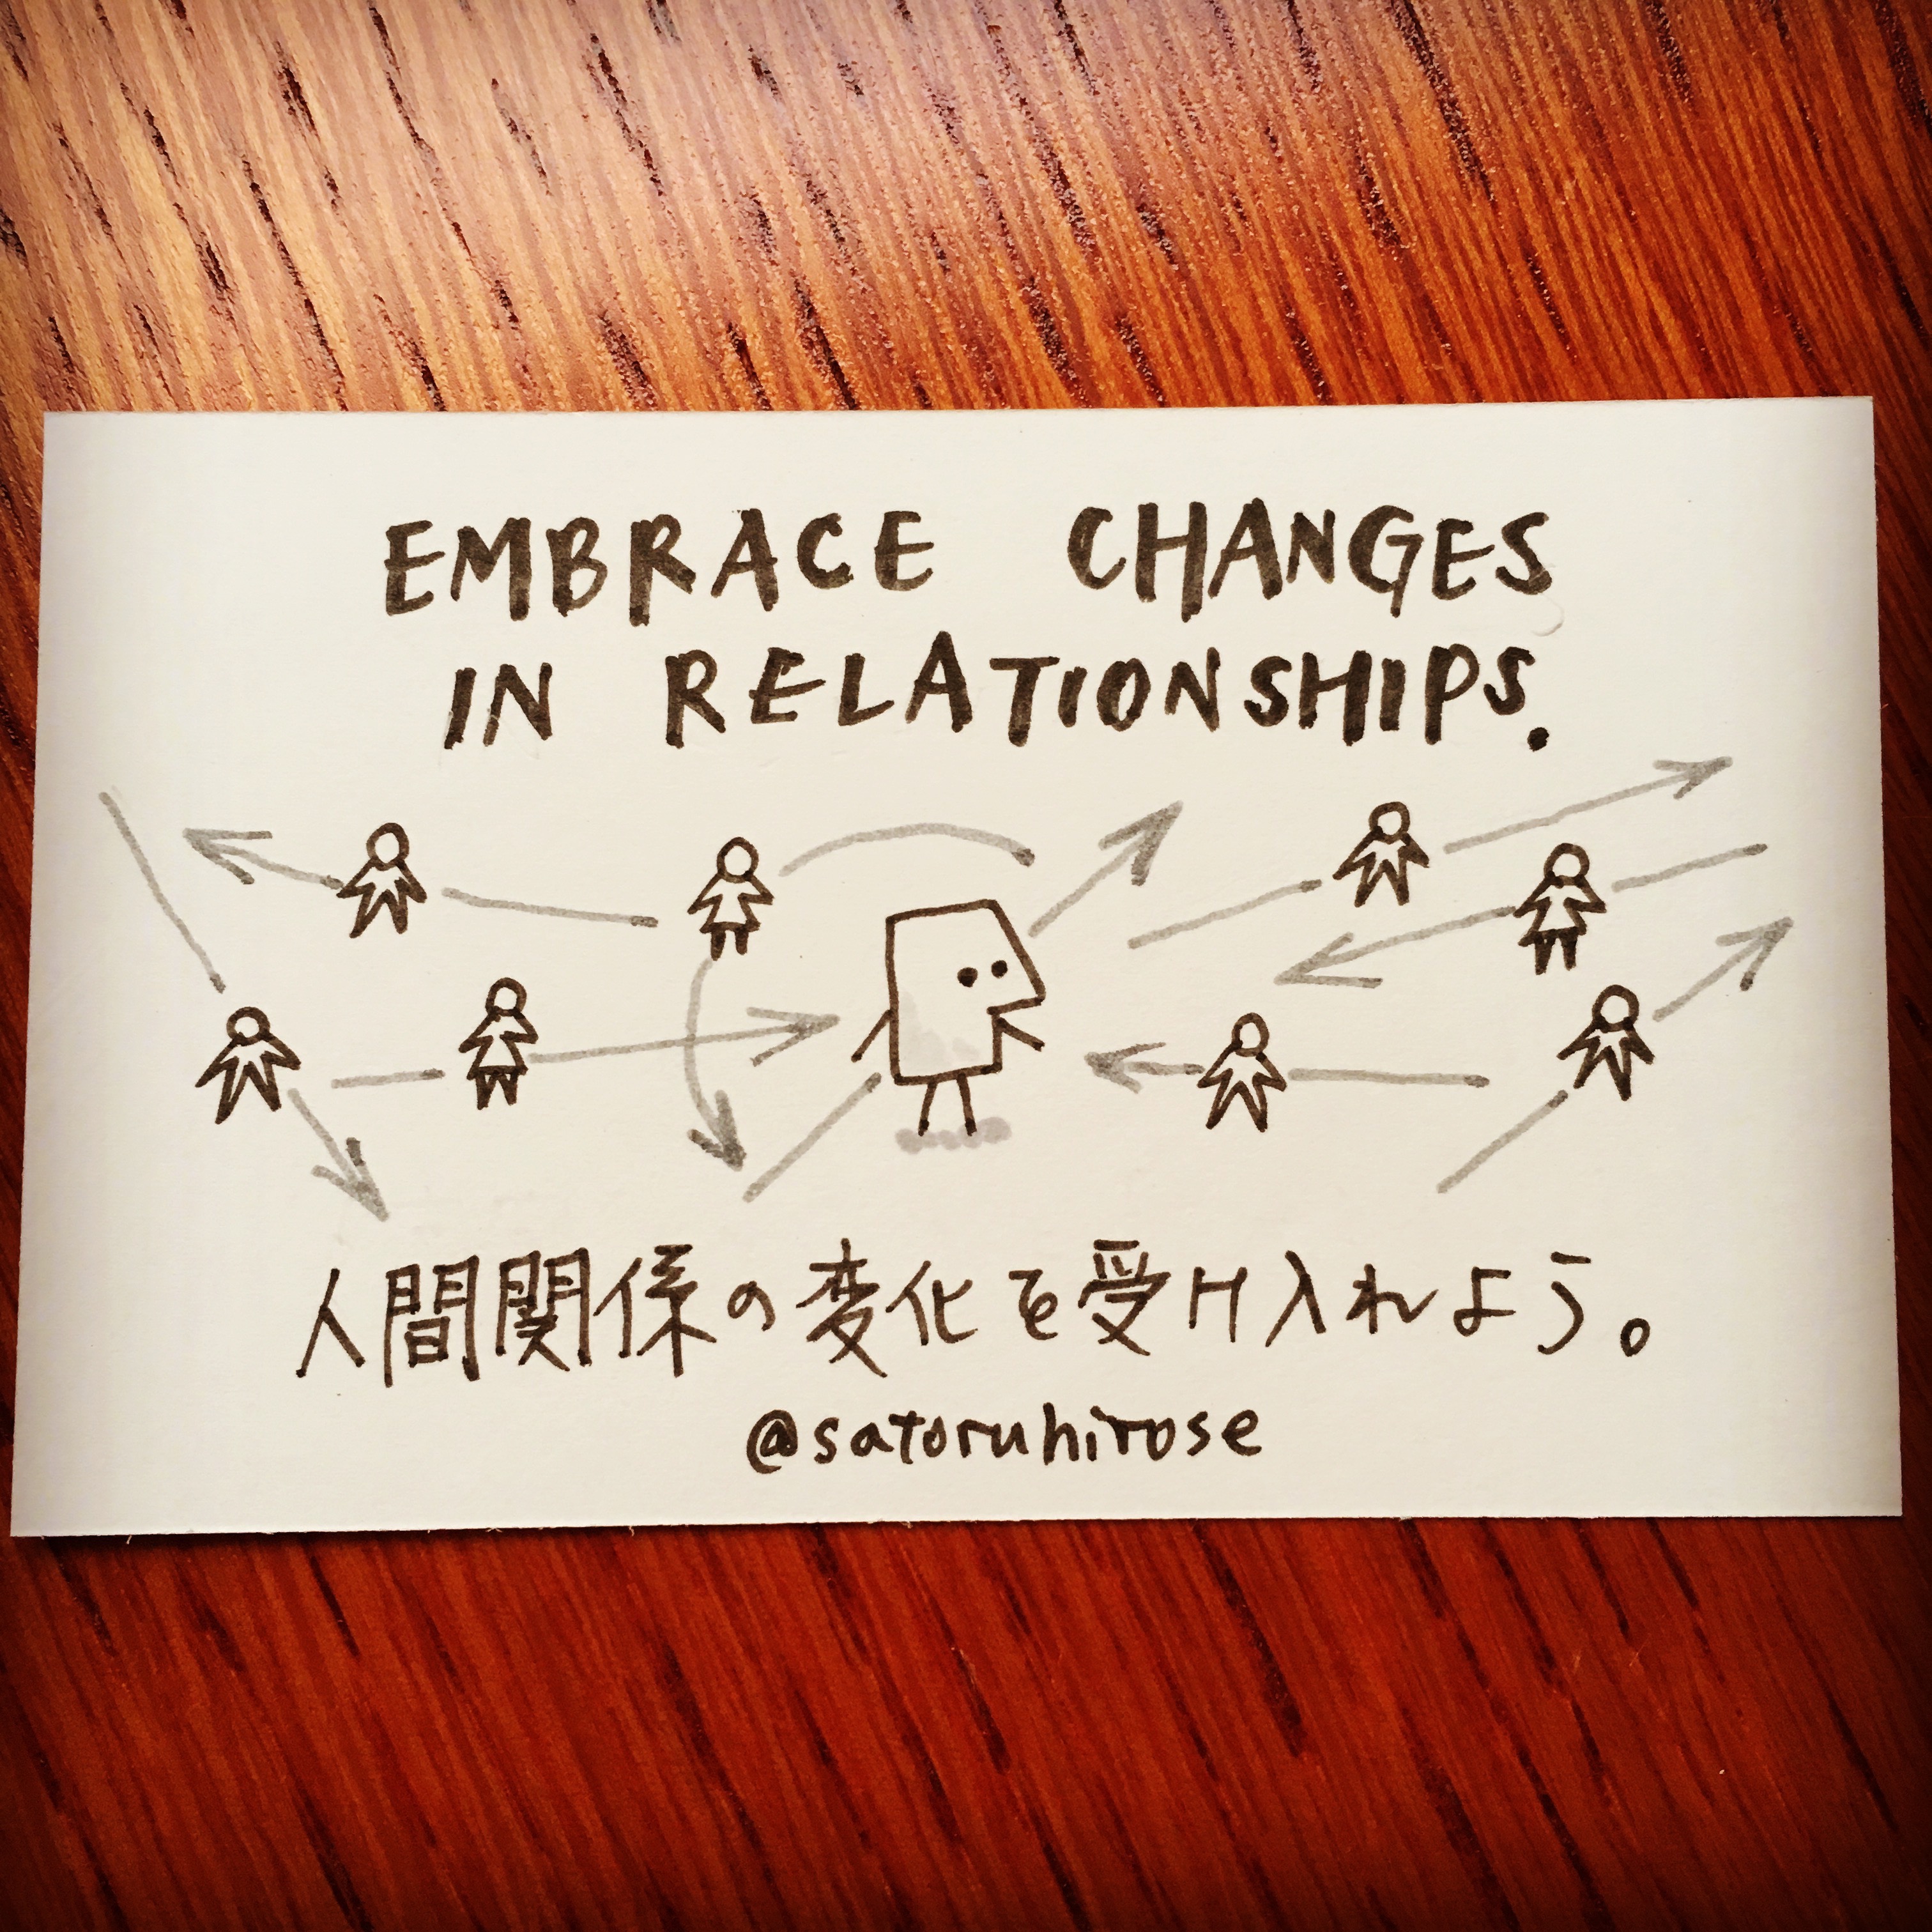 Embrace changes in relationships.